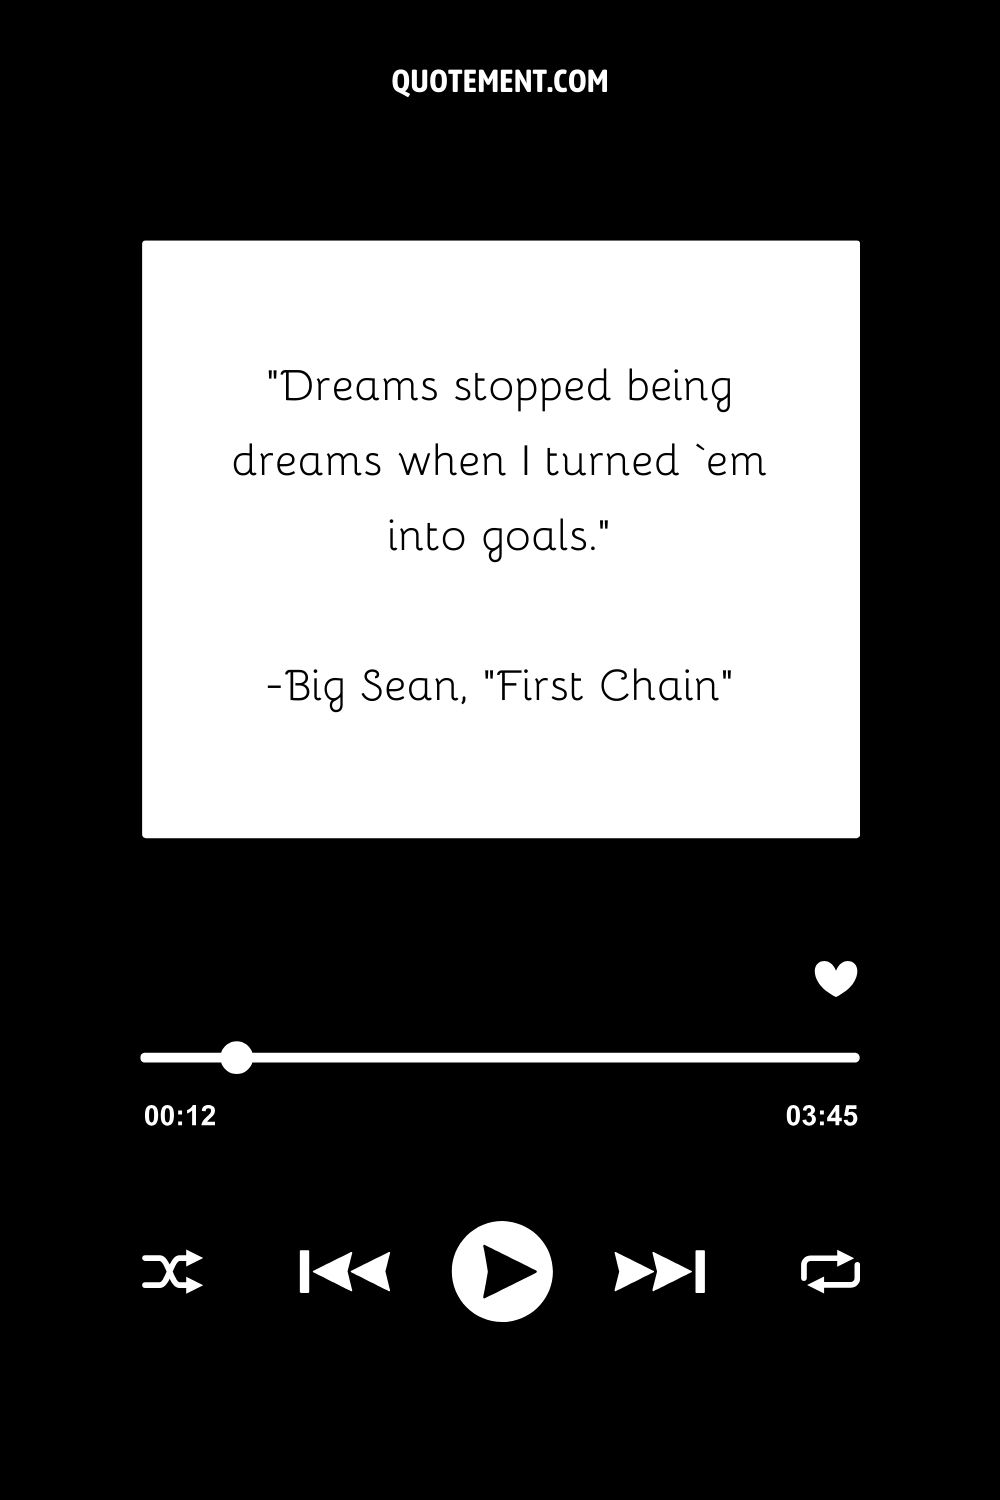 “Dreams stopped being dreams when I turned ‘em into goals.” — Big Sean, “First Chain”